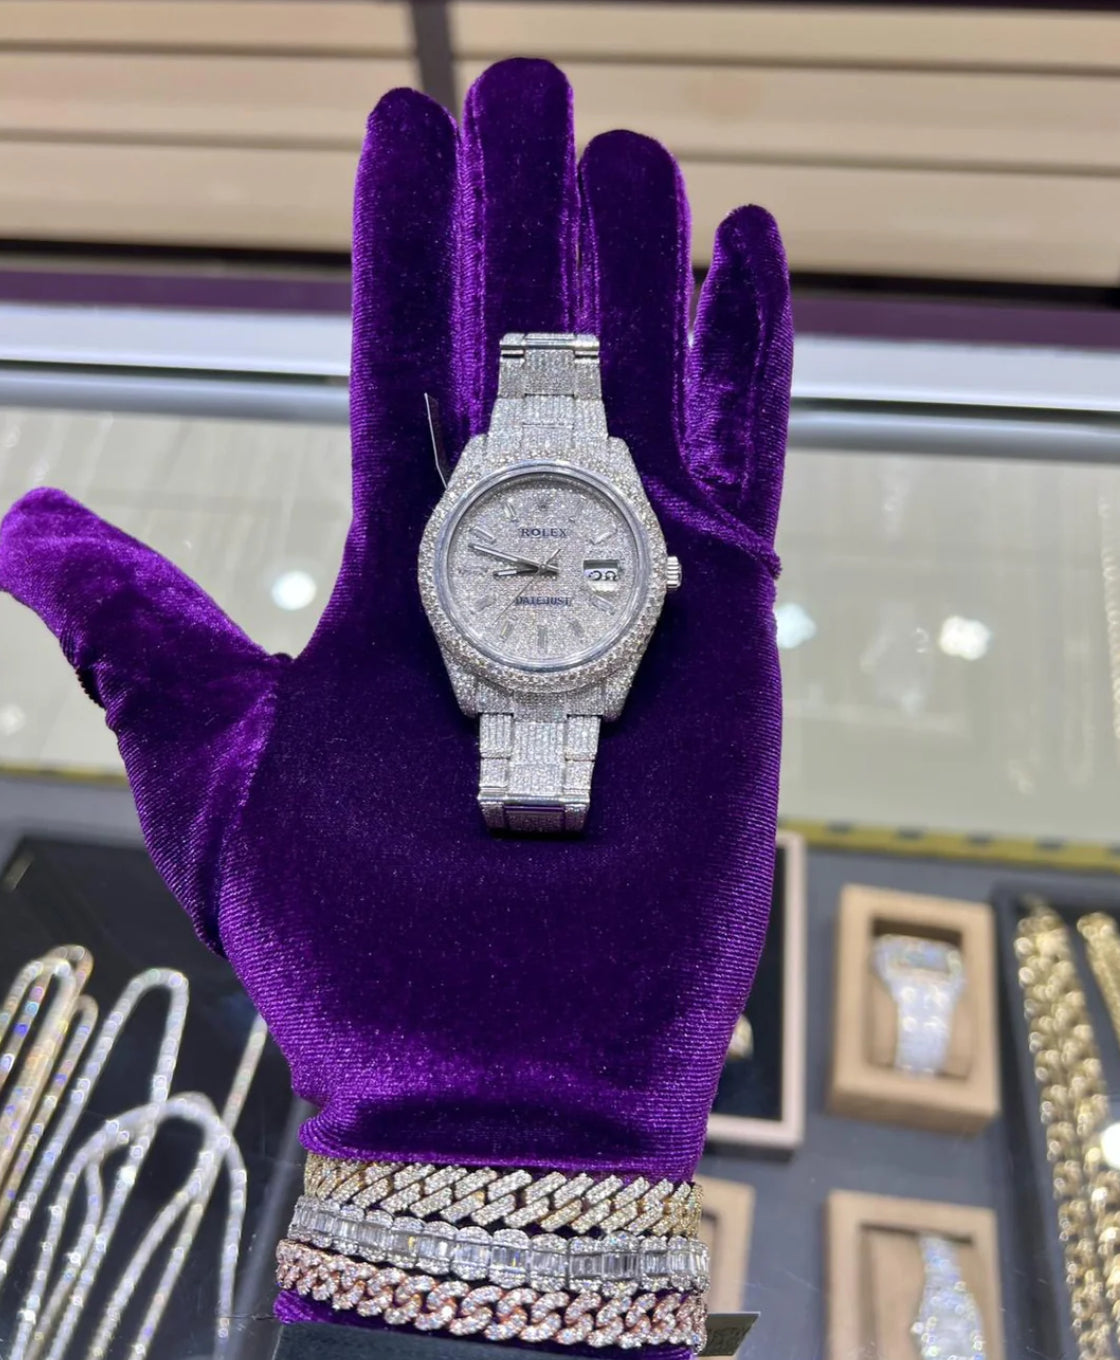 Diamond Iced Out Rolex Datejust 41 | 20 Carats Of Diamonds | Custom Baguette Stick Diamond Dial |Honey Comb Flower setting | Oyster Band